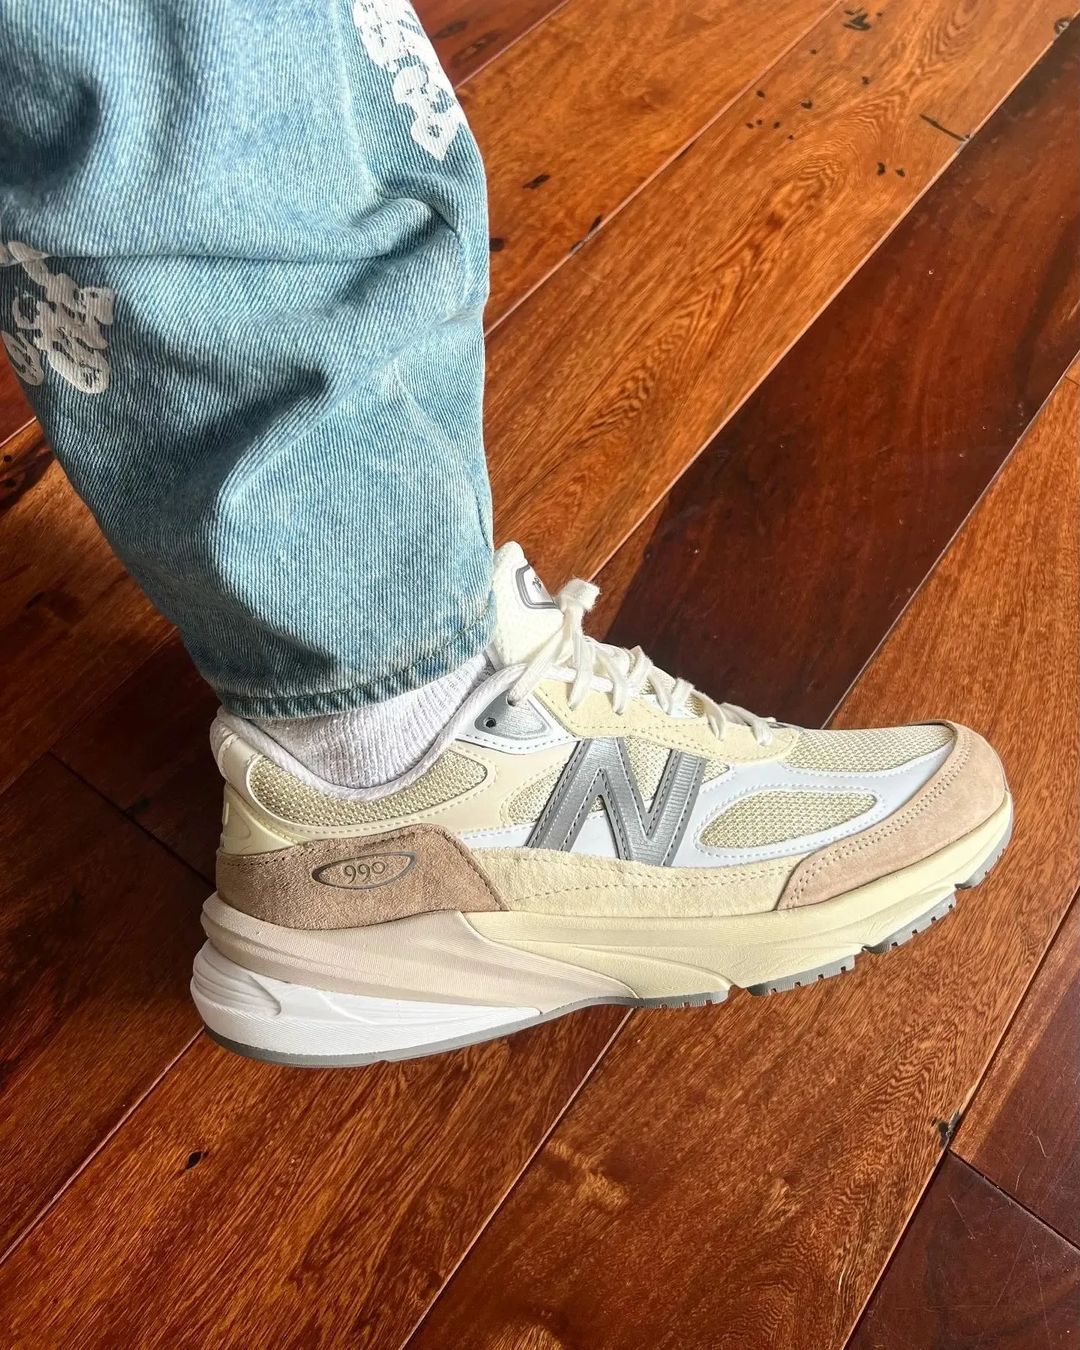 The Next New Balance 990v6 is Curated in Cream and White | House